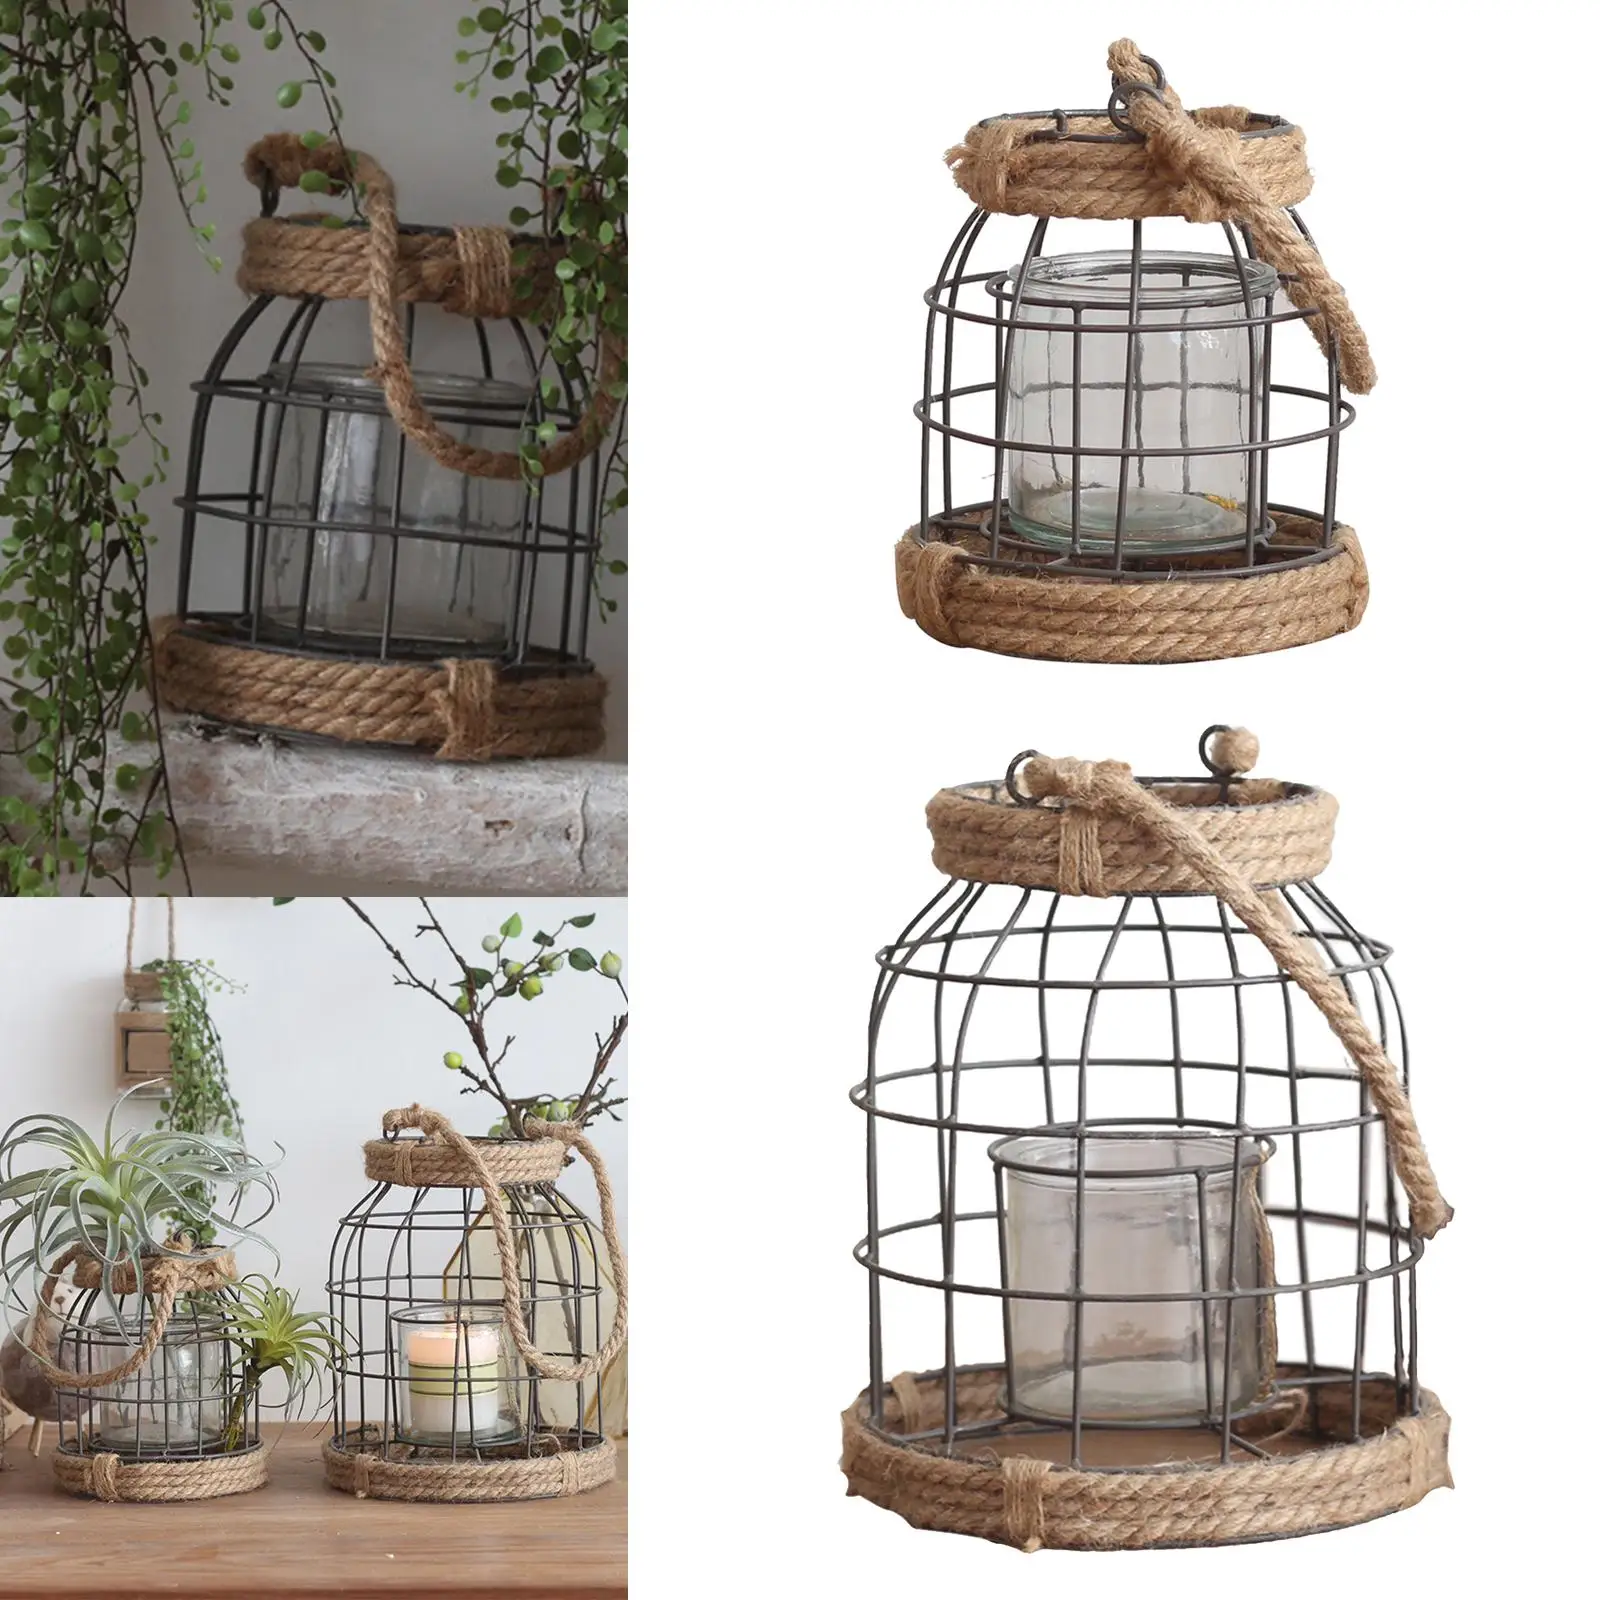 Decorative Metal and Rope Lantern Candle Holder, Rustic Outdoor Floor or Table Lantern for Farmhouse Patio Decor